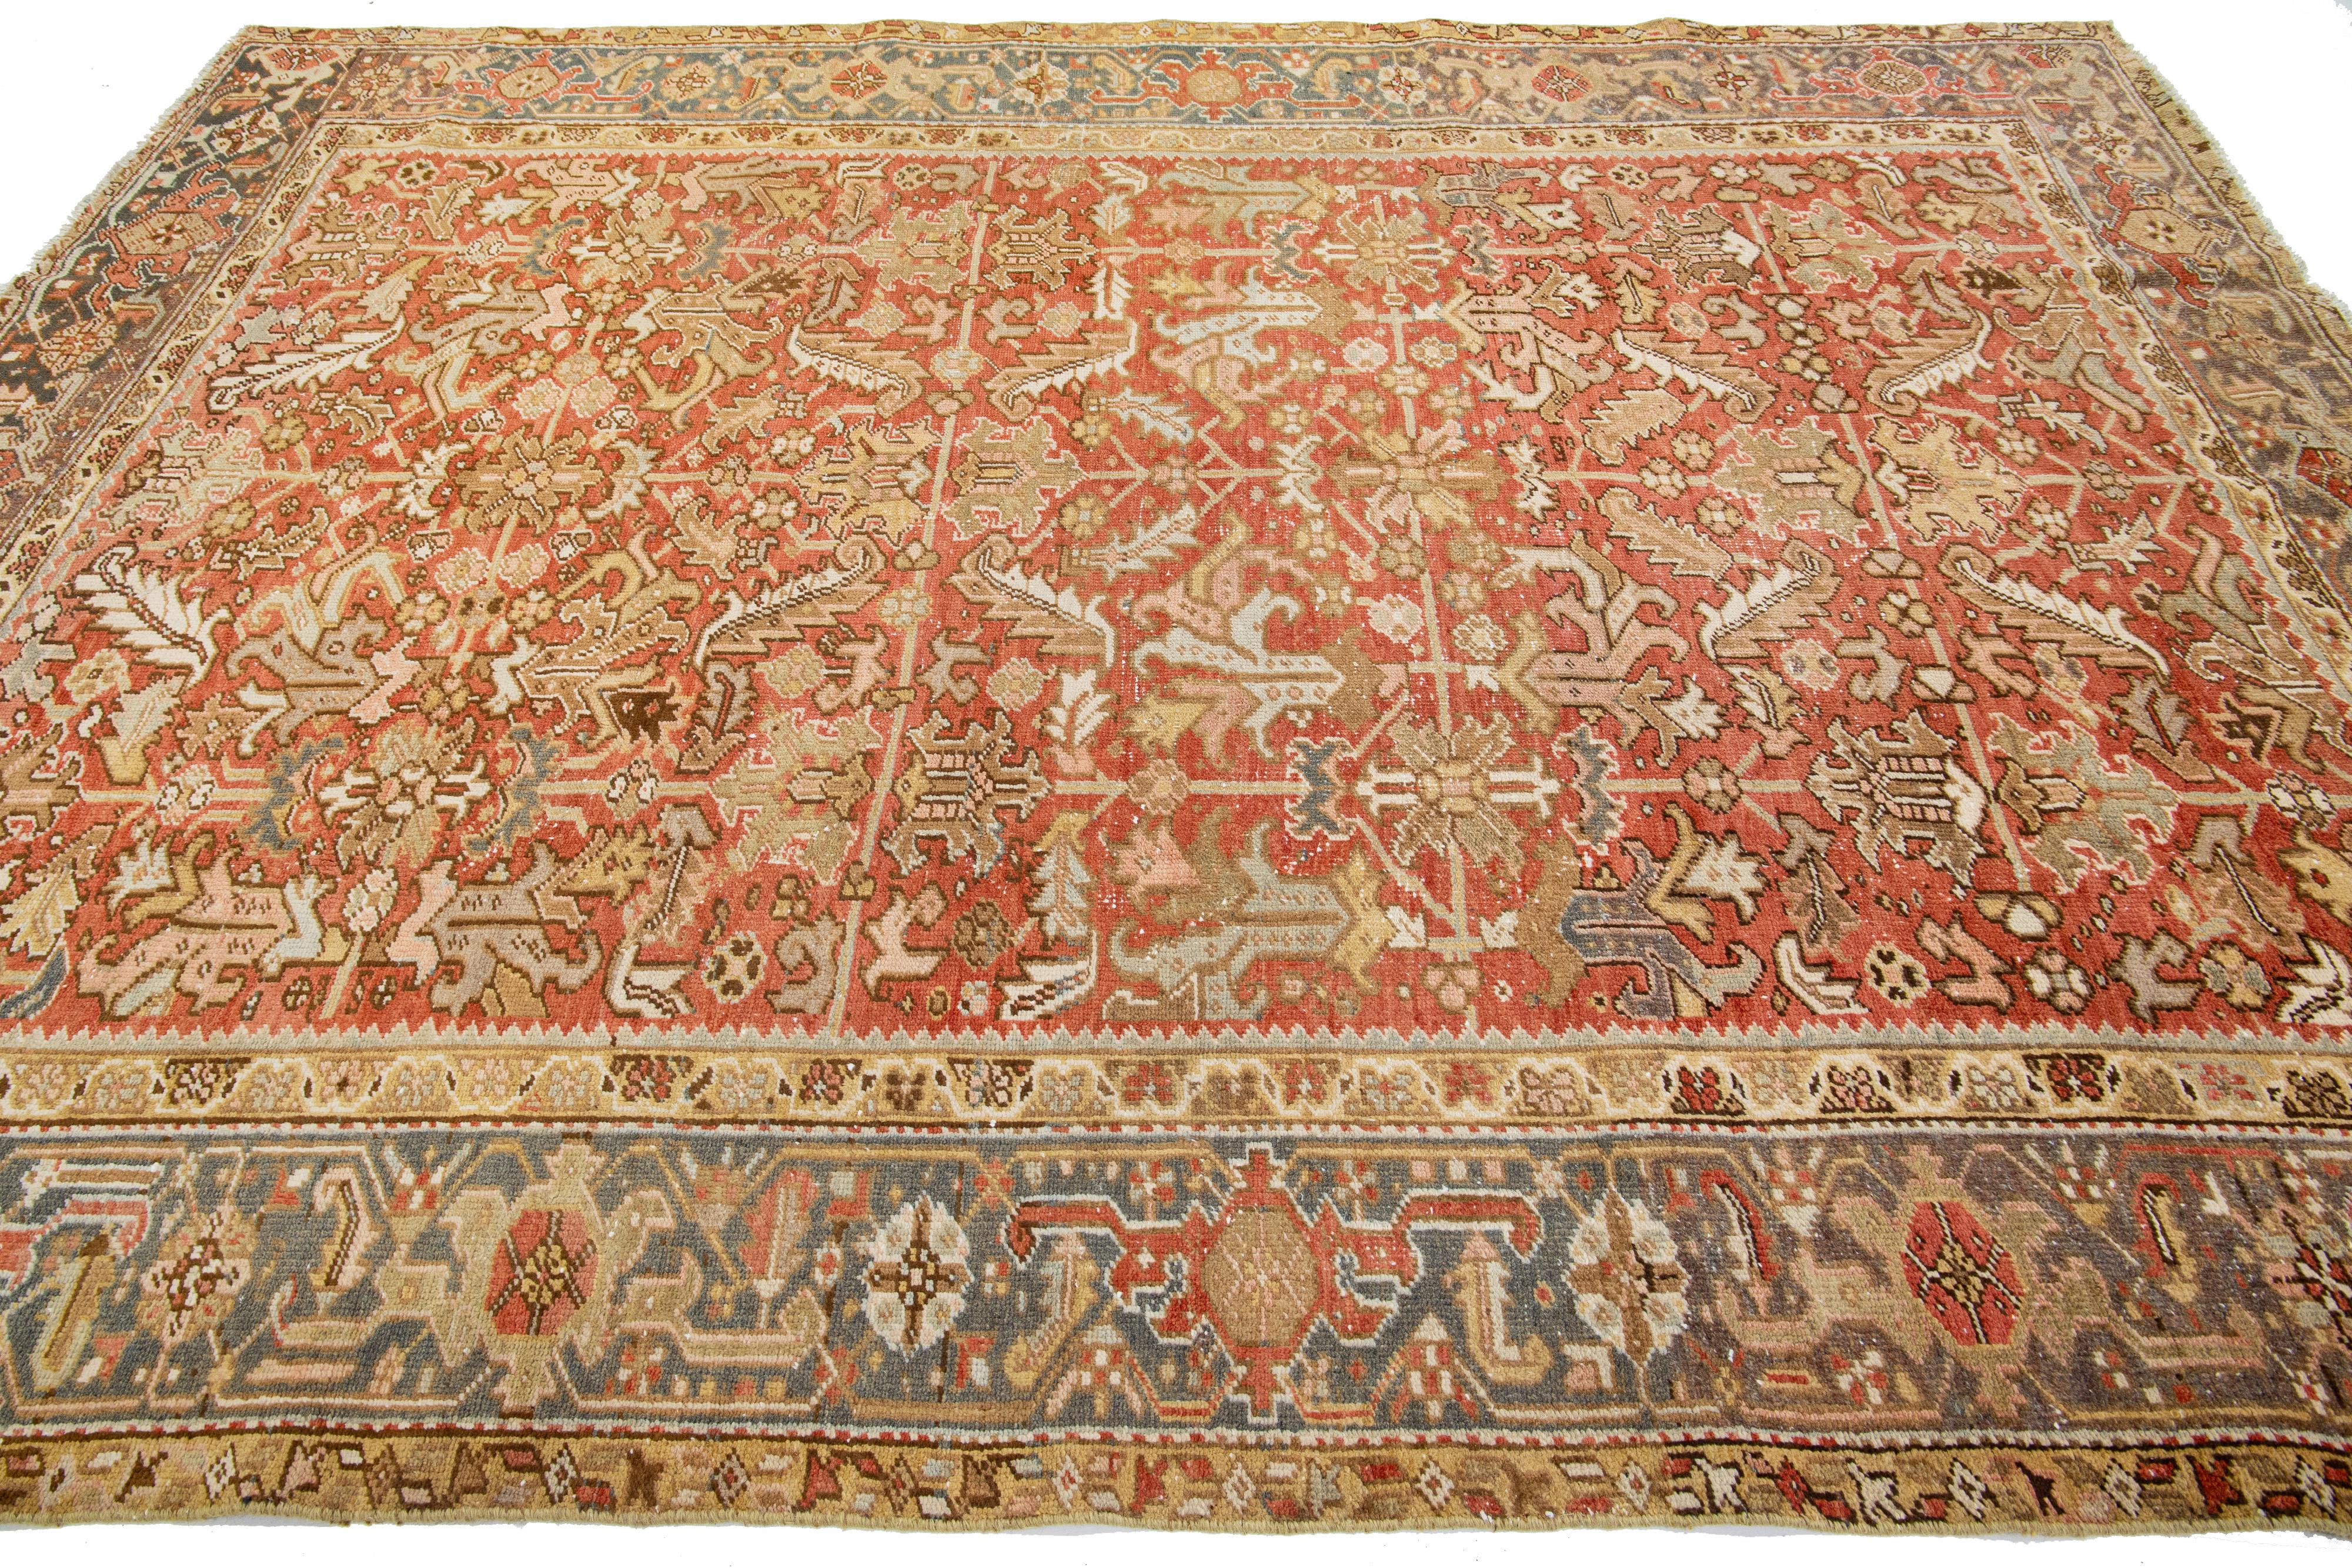 Hand-Knotted Allover Antique Persian Heriz Wool Rug In Rust Color From The 1920s For Sale